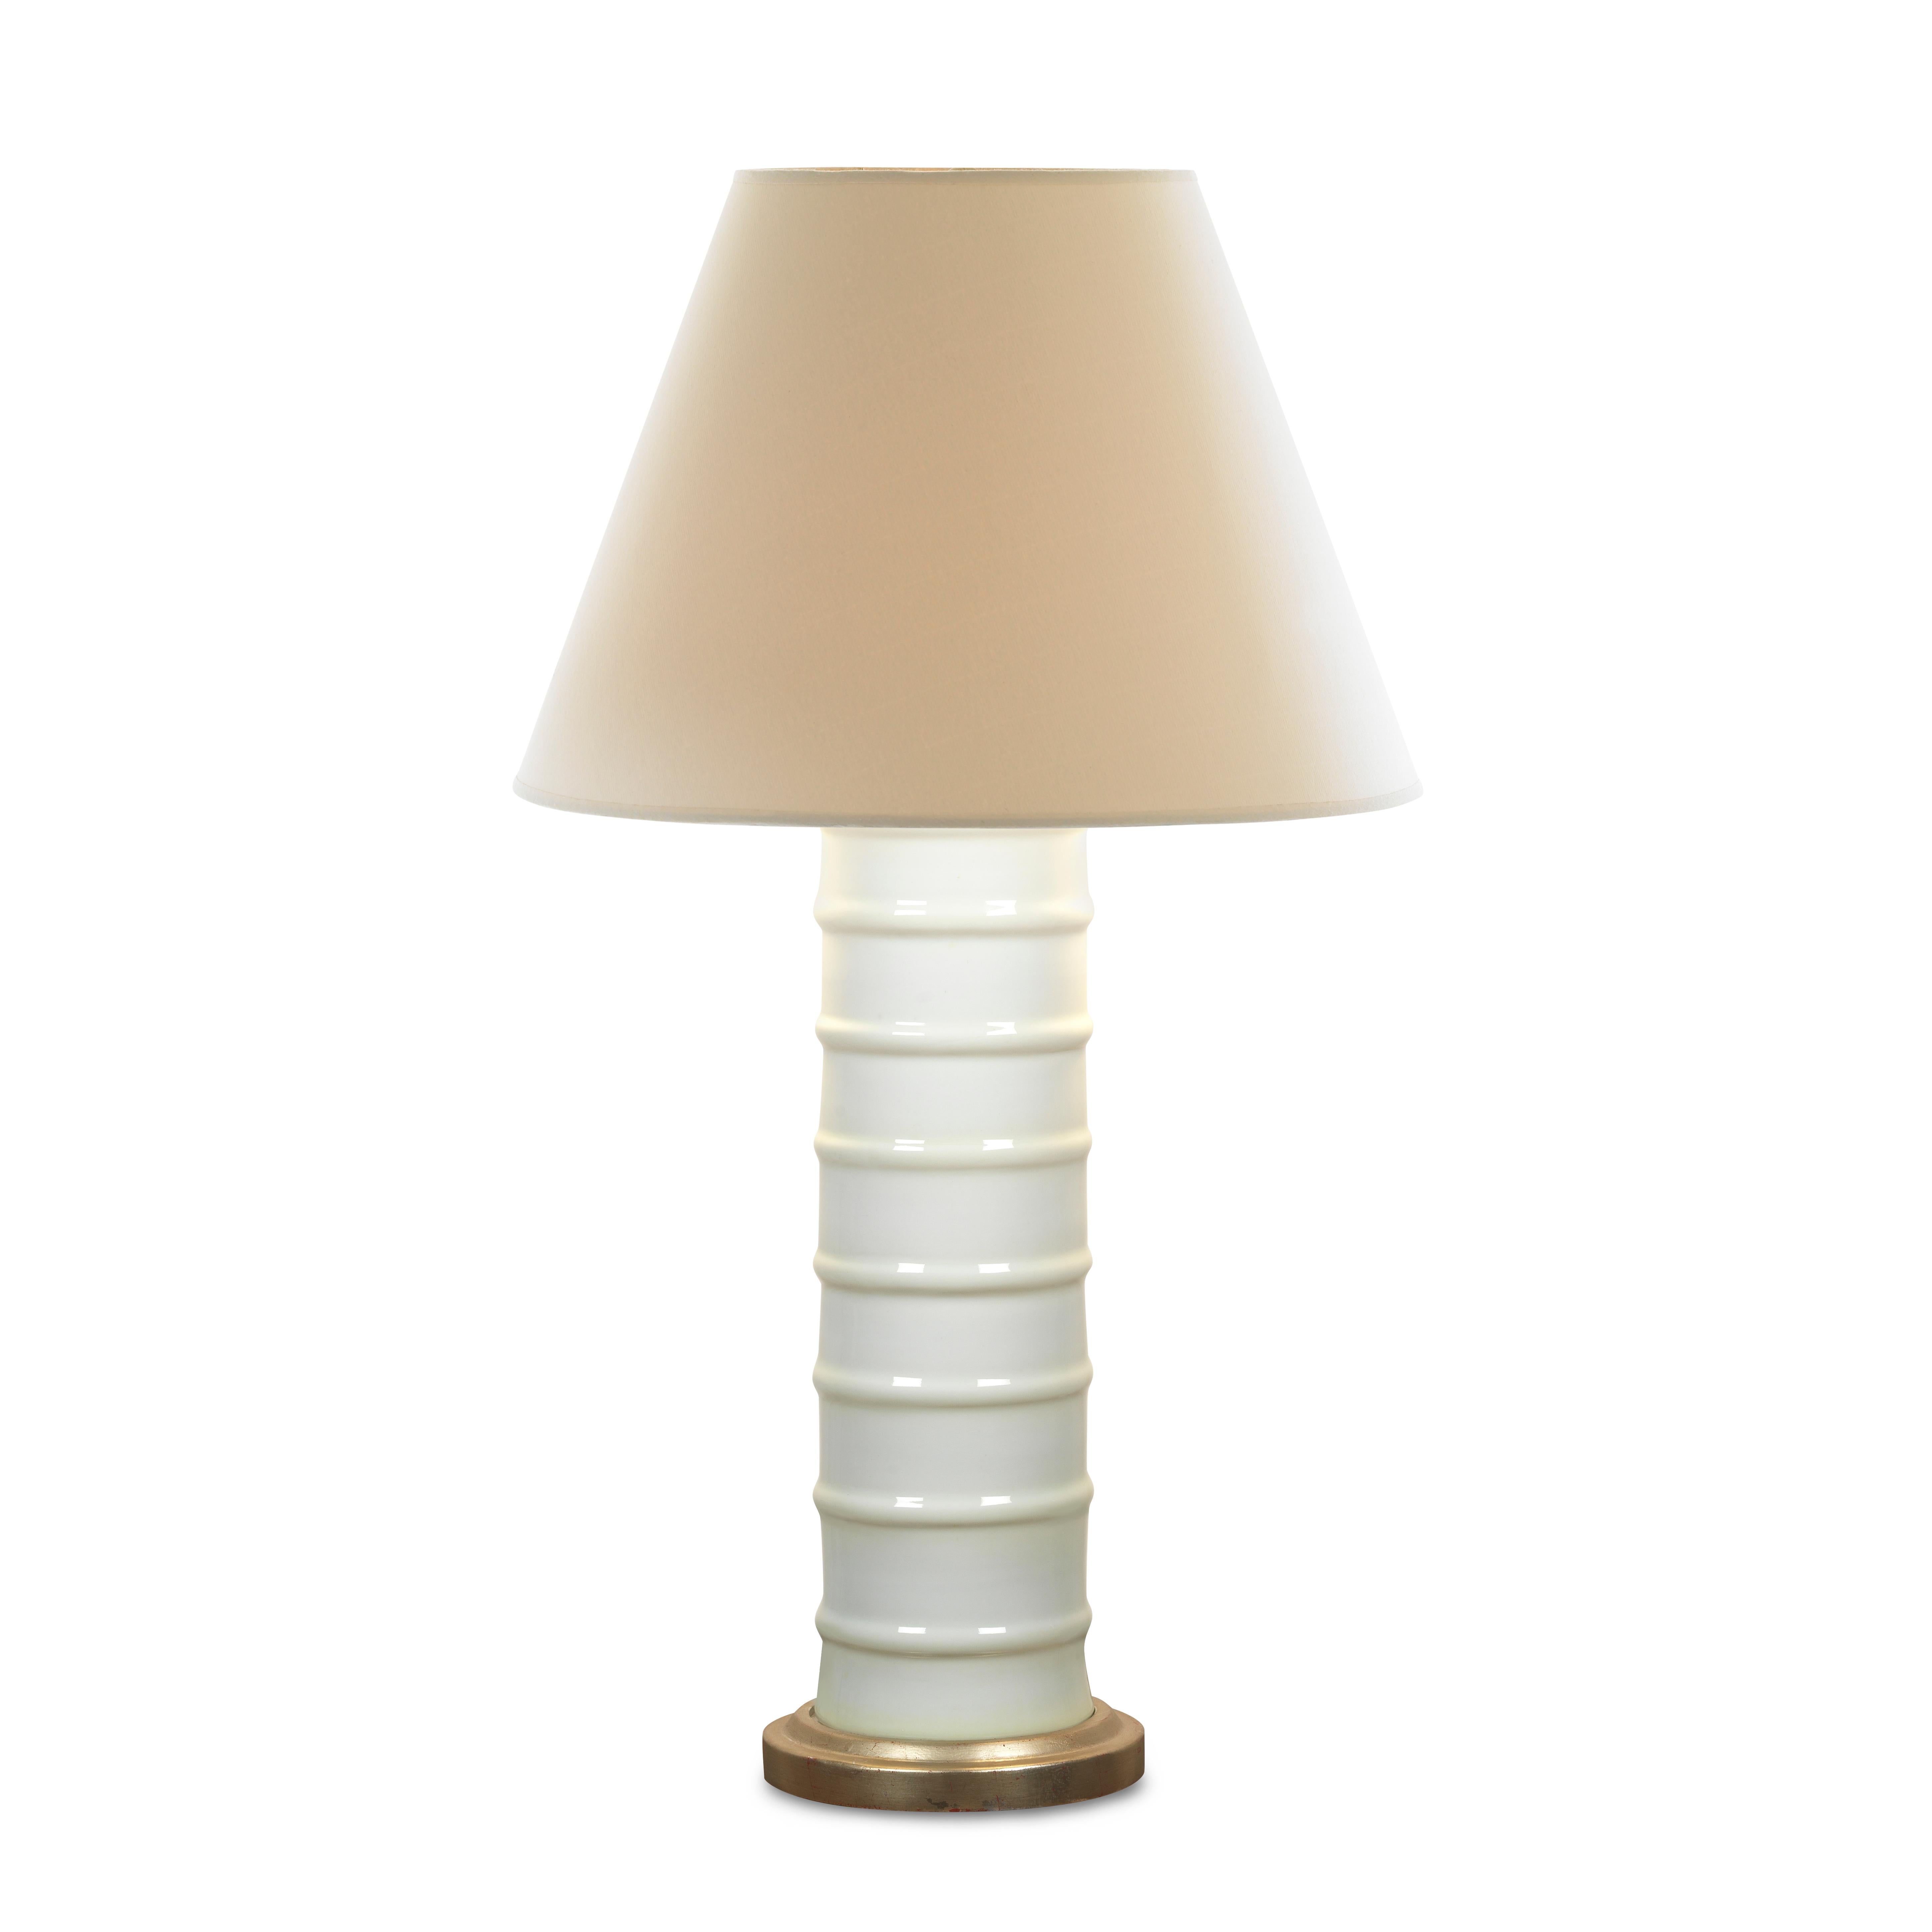 One trick to successful white or neutral color schemes is to add interest through texture. Our Contoured Lamp has delicate ribbing that brings your eye from the top to the bottom of its slim cylindrical base. This truly neutral lamp would work